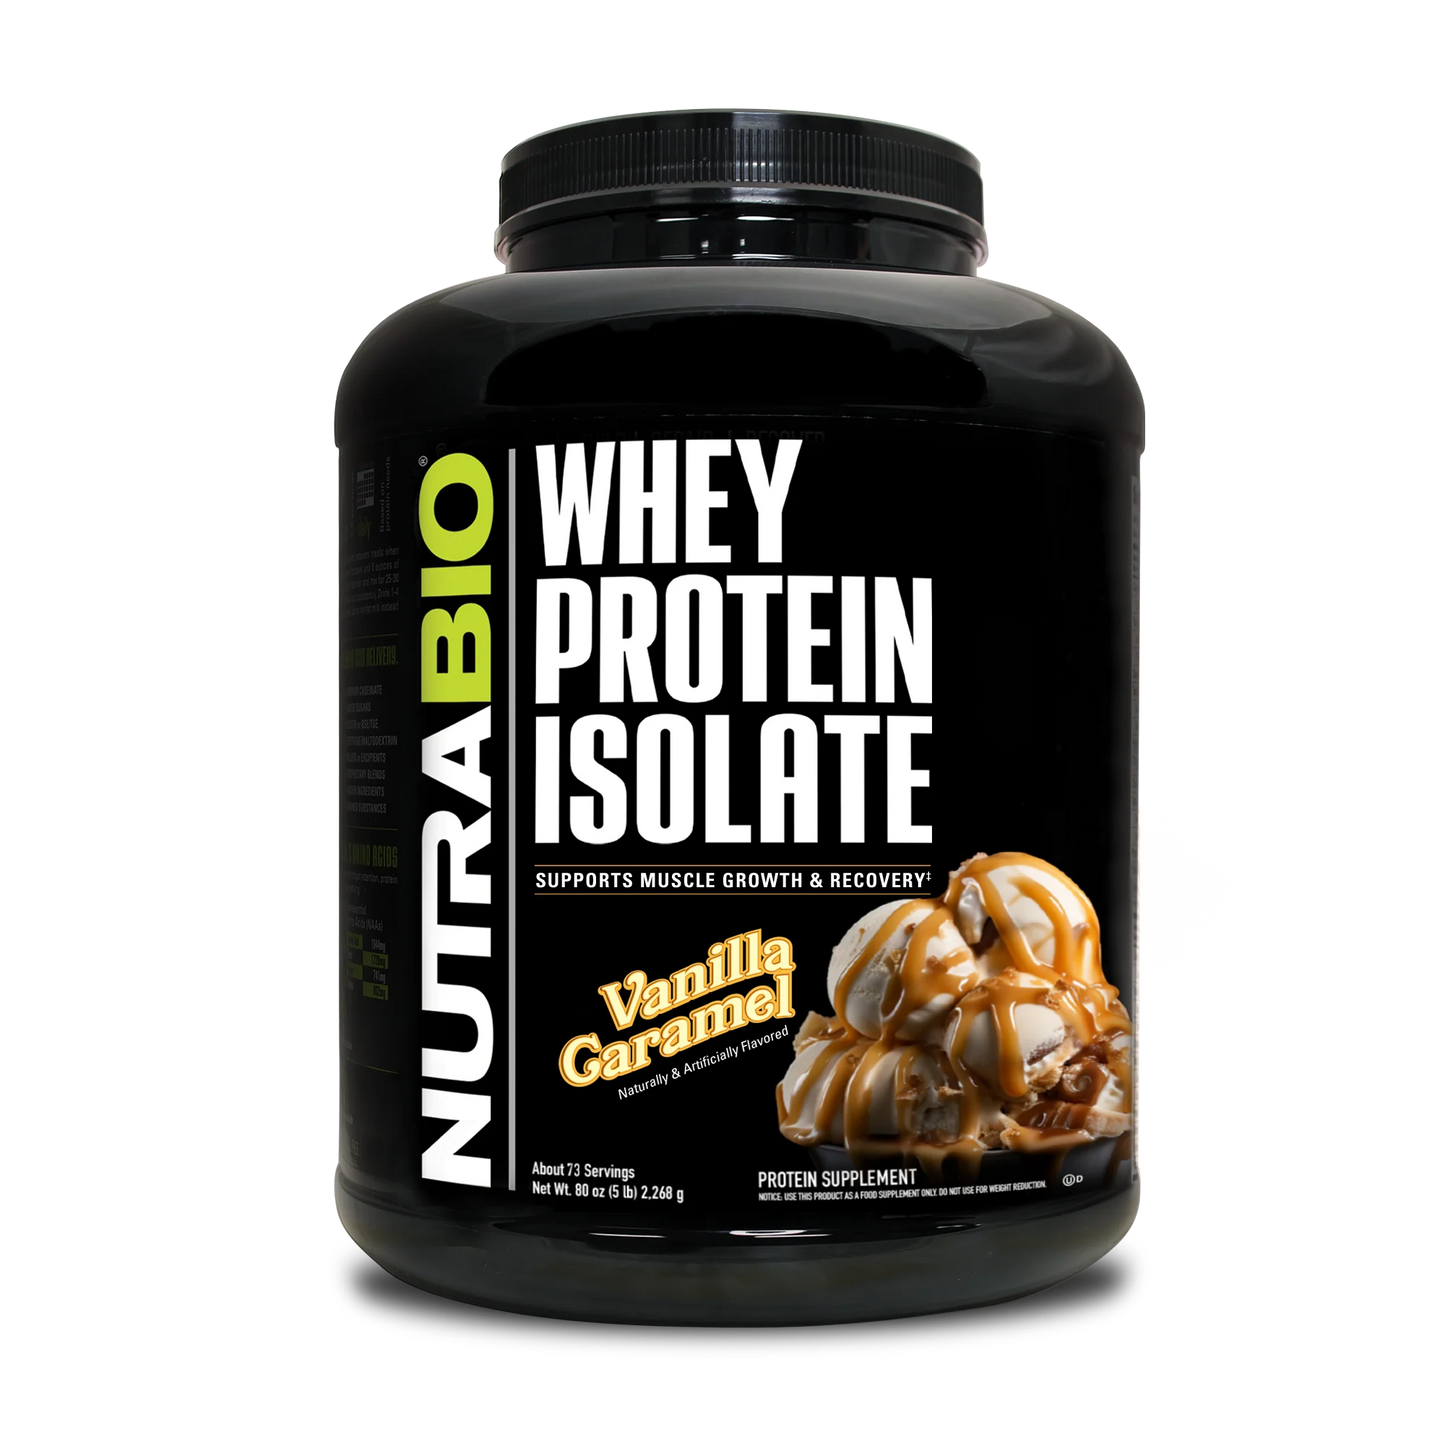 Whey Protein Isolate by Nutrabio